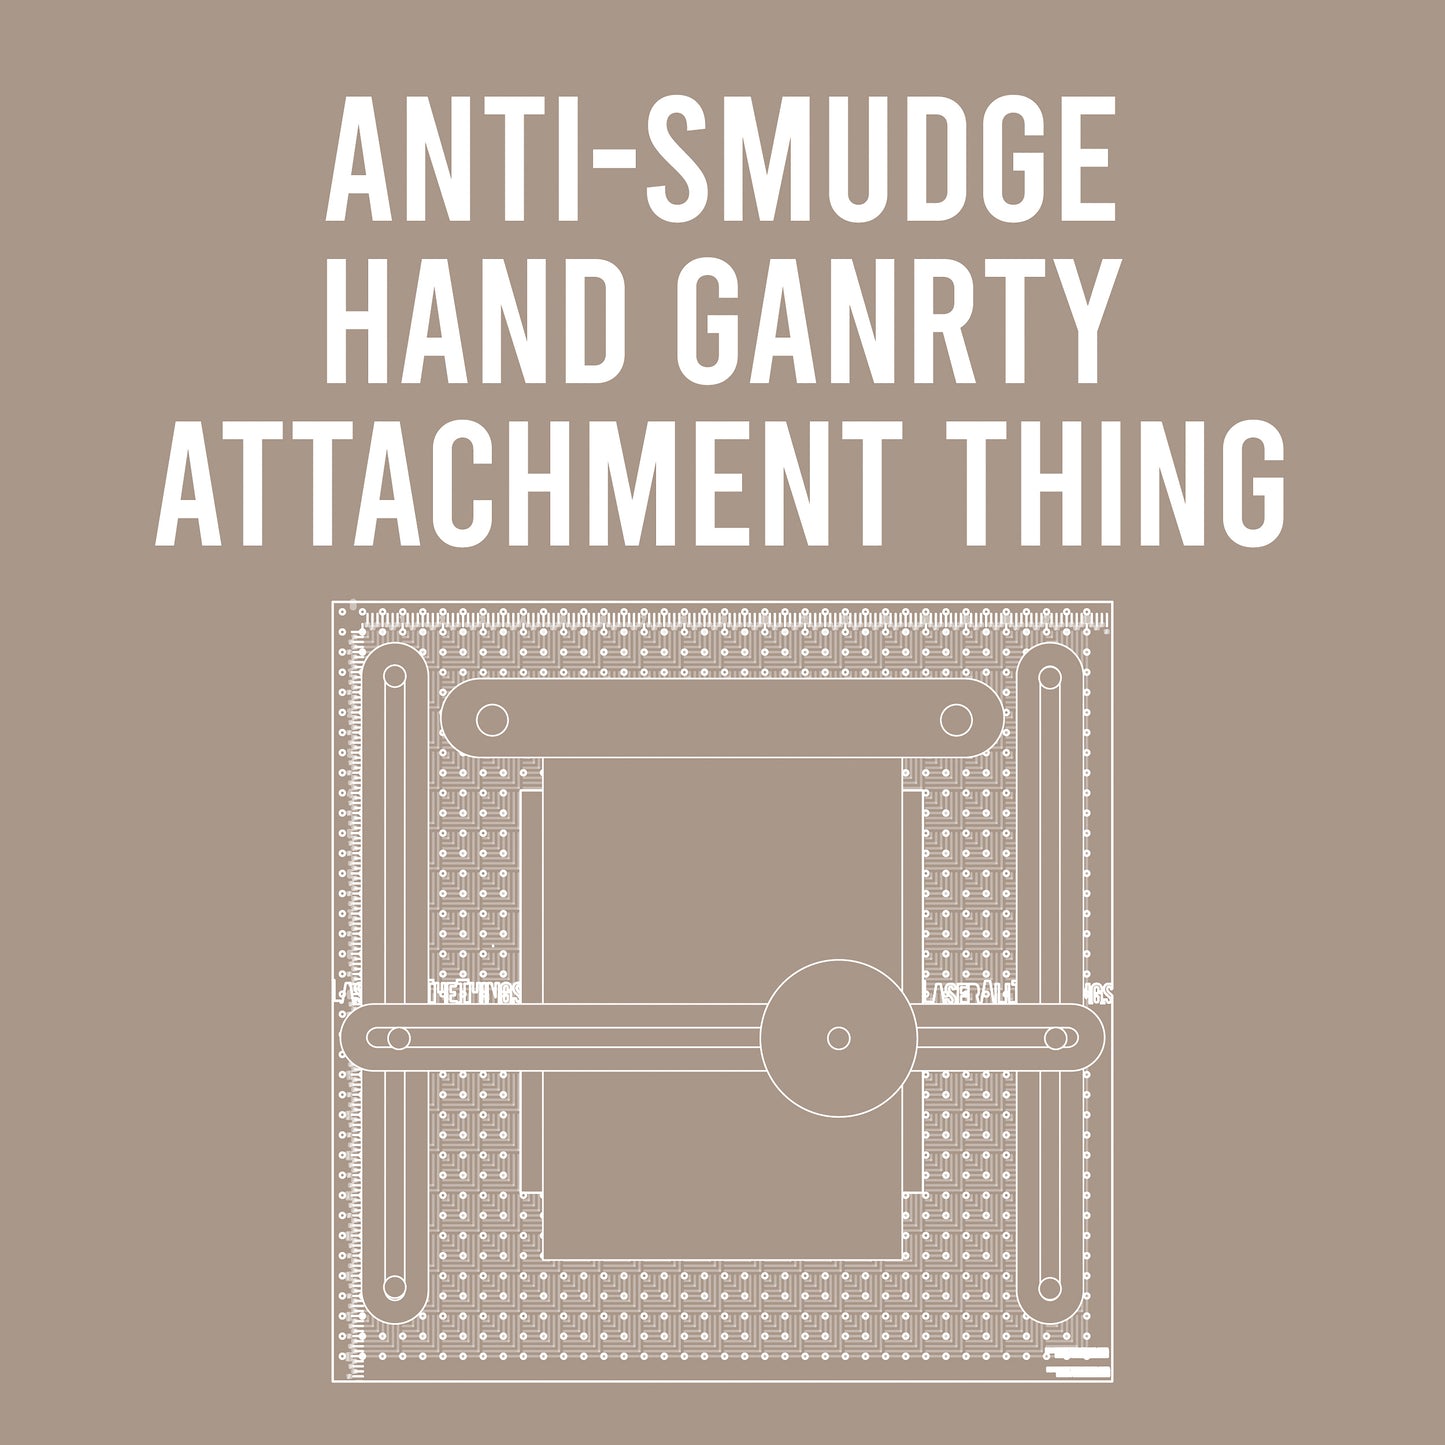 Alpha Thing: Anti-Smudge Hand Gantry Attachment Thing